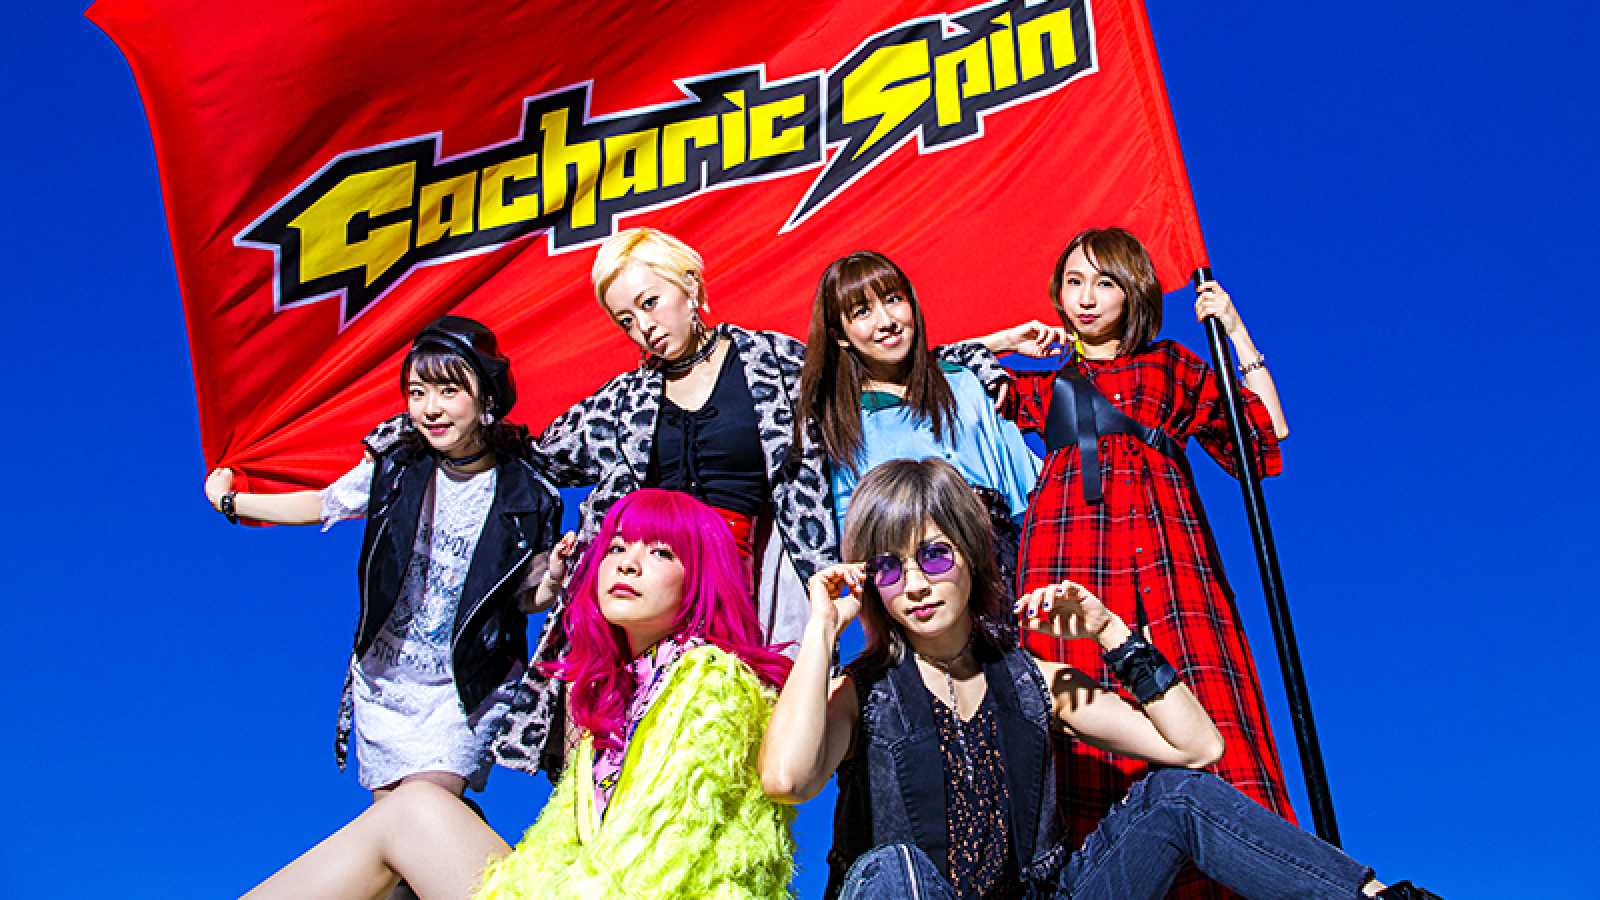 Gacharic Spin © Gacharic Spin. All Rights Reserved.